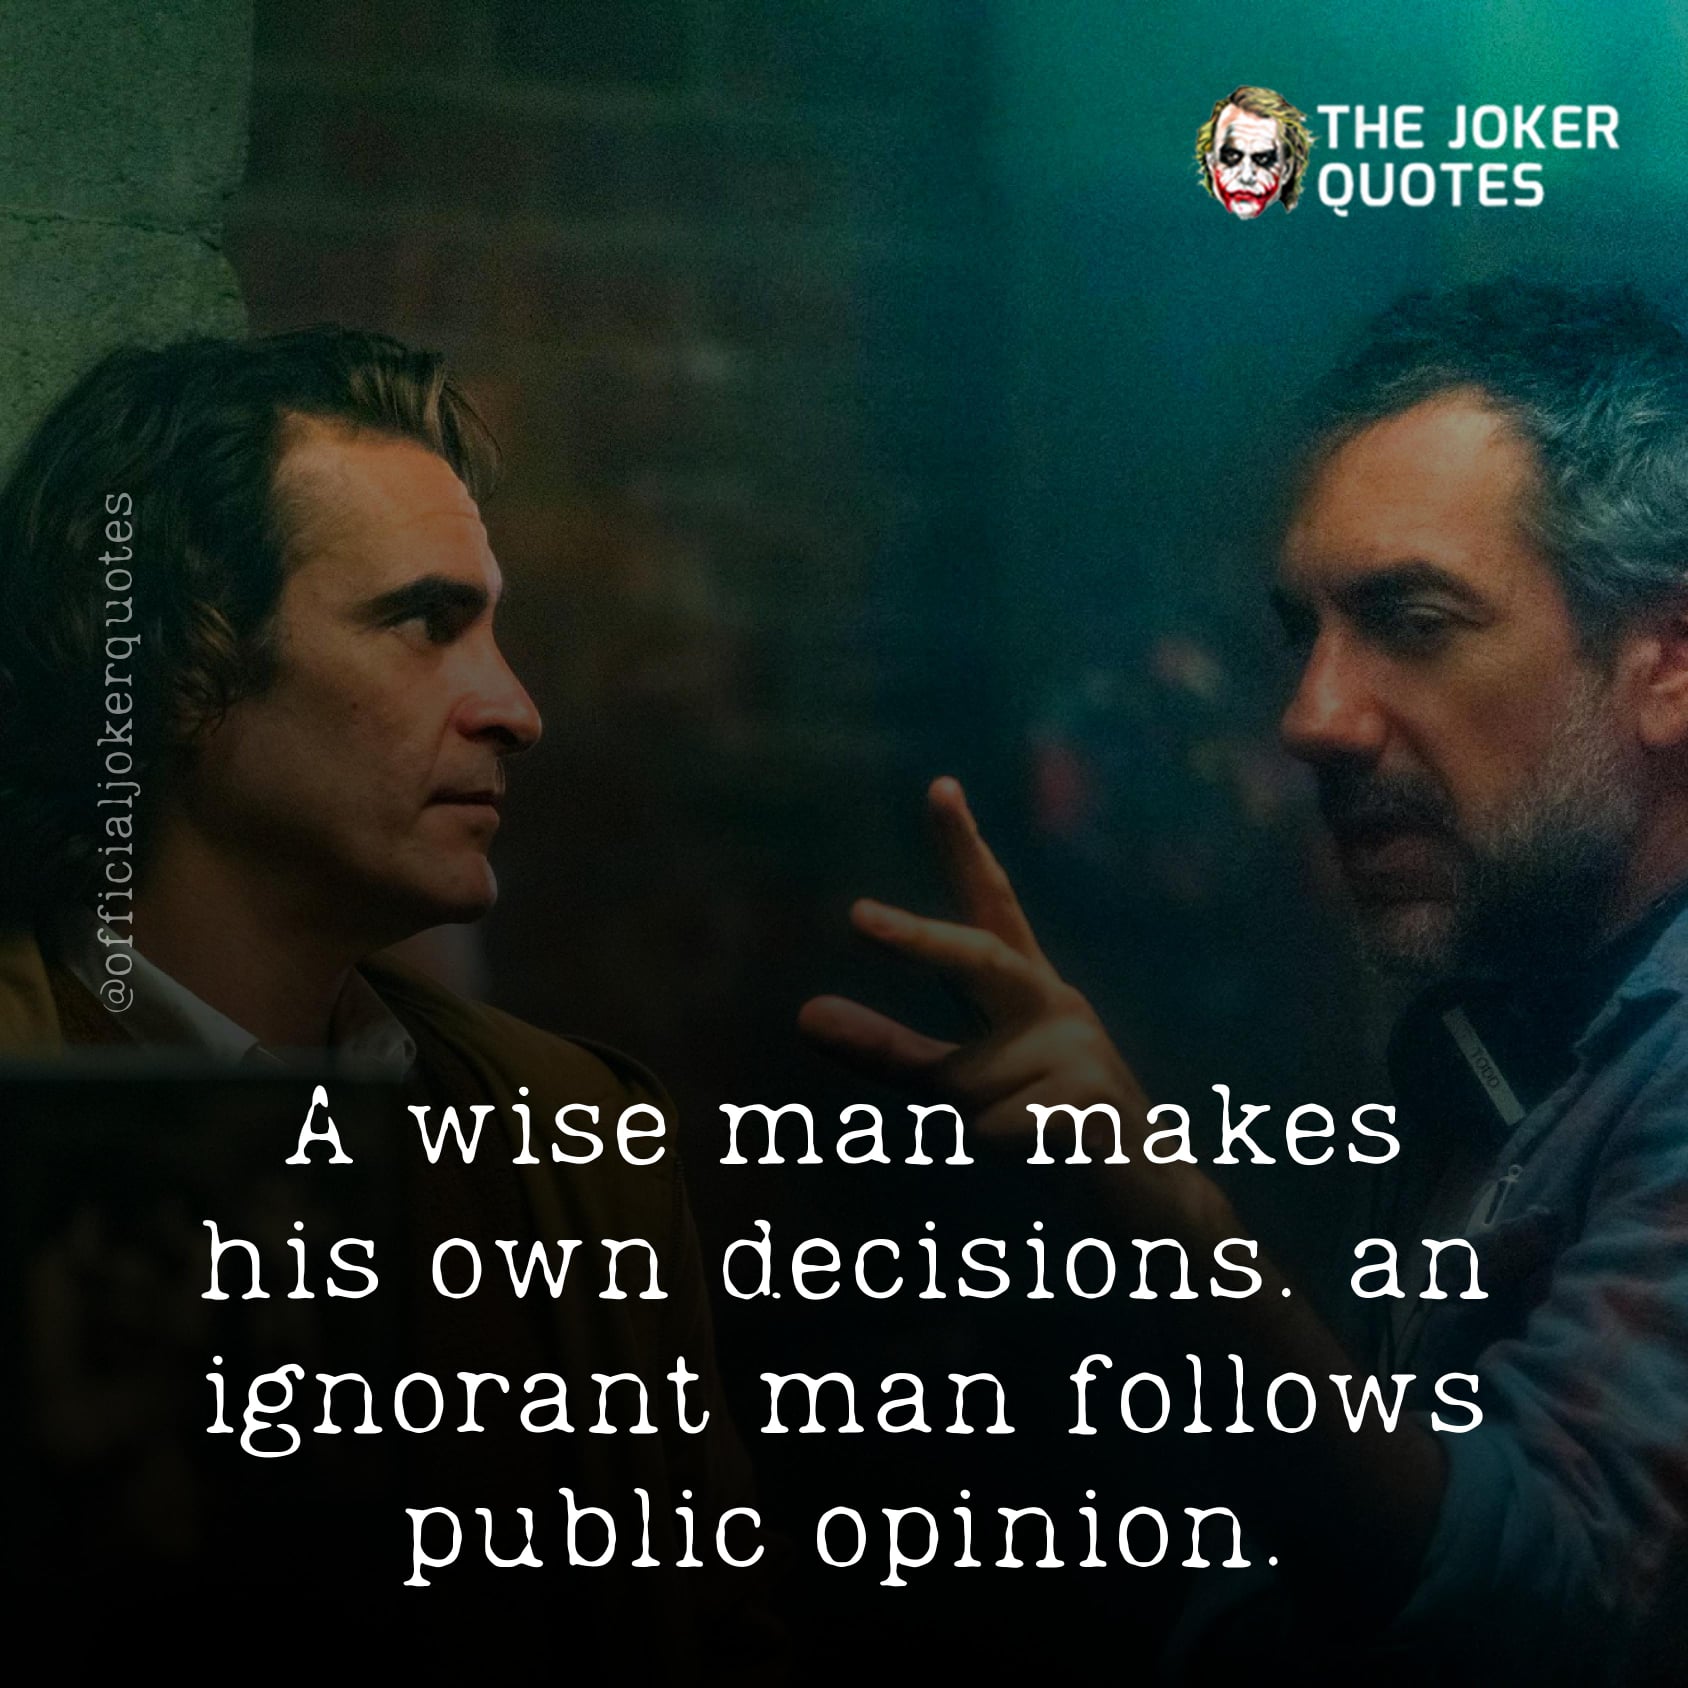 A wise man makes his own decisions but an ignorant man follows the public opinion.